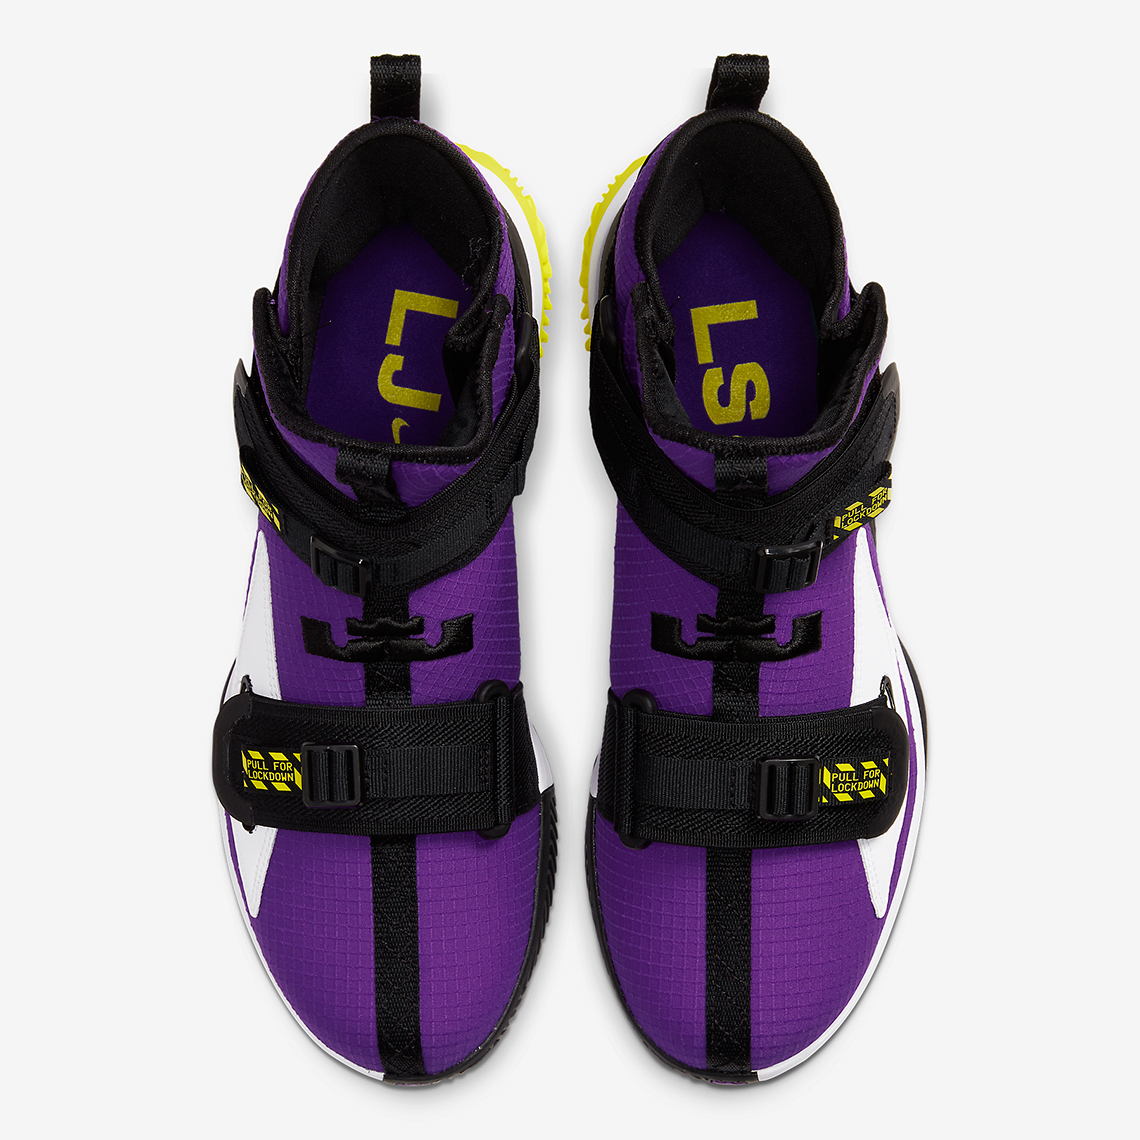 Nike LeBron Soldier 13 Gets Another Lakers Colorway: Official Photos